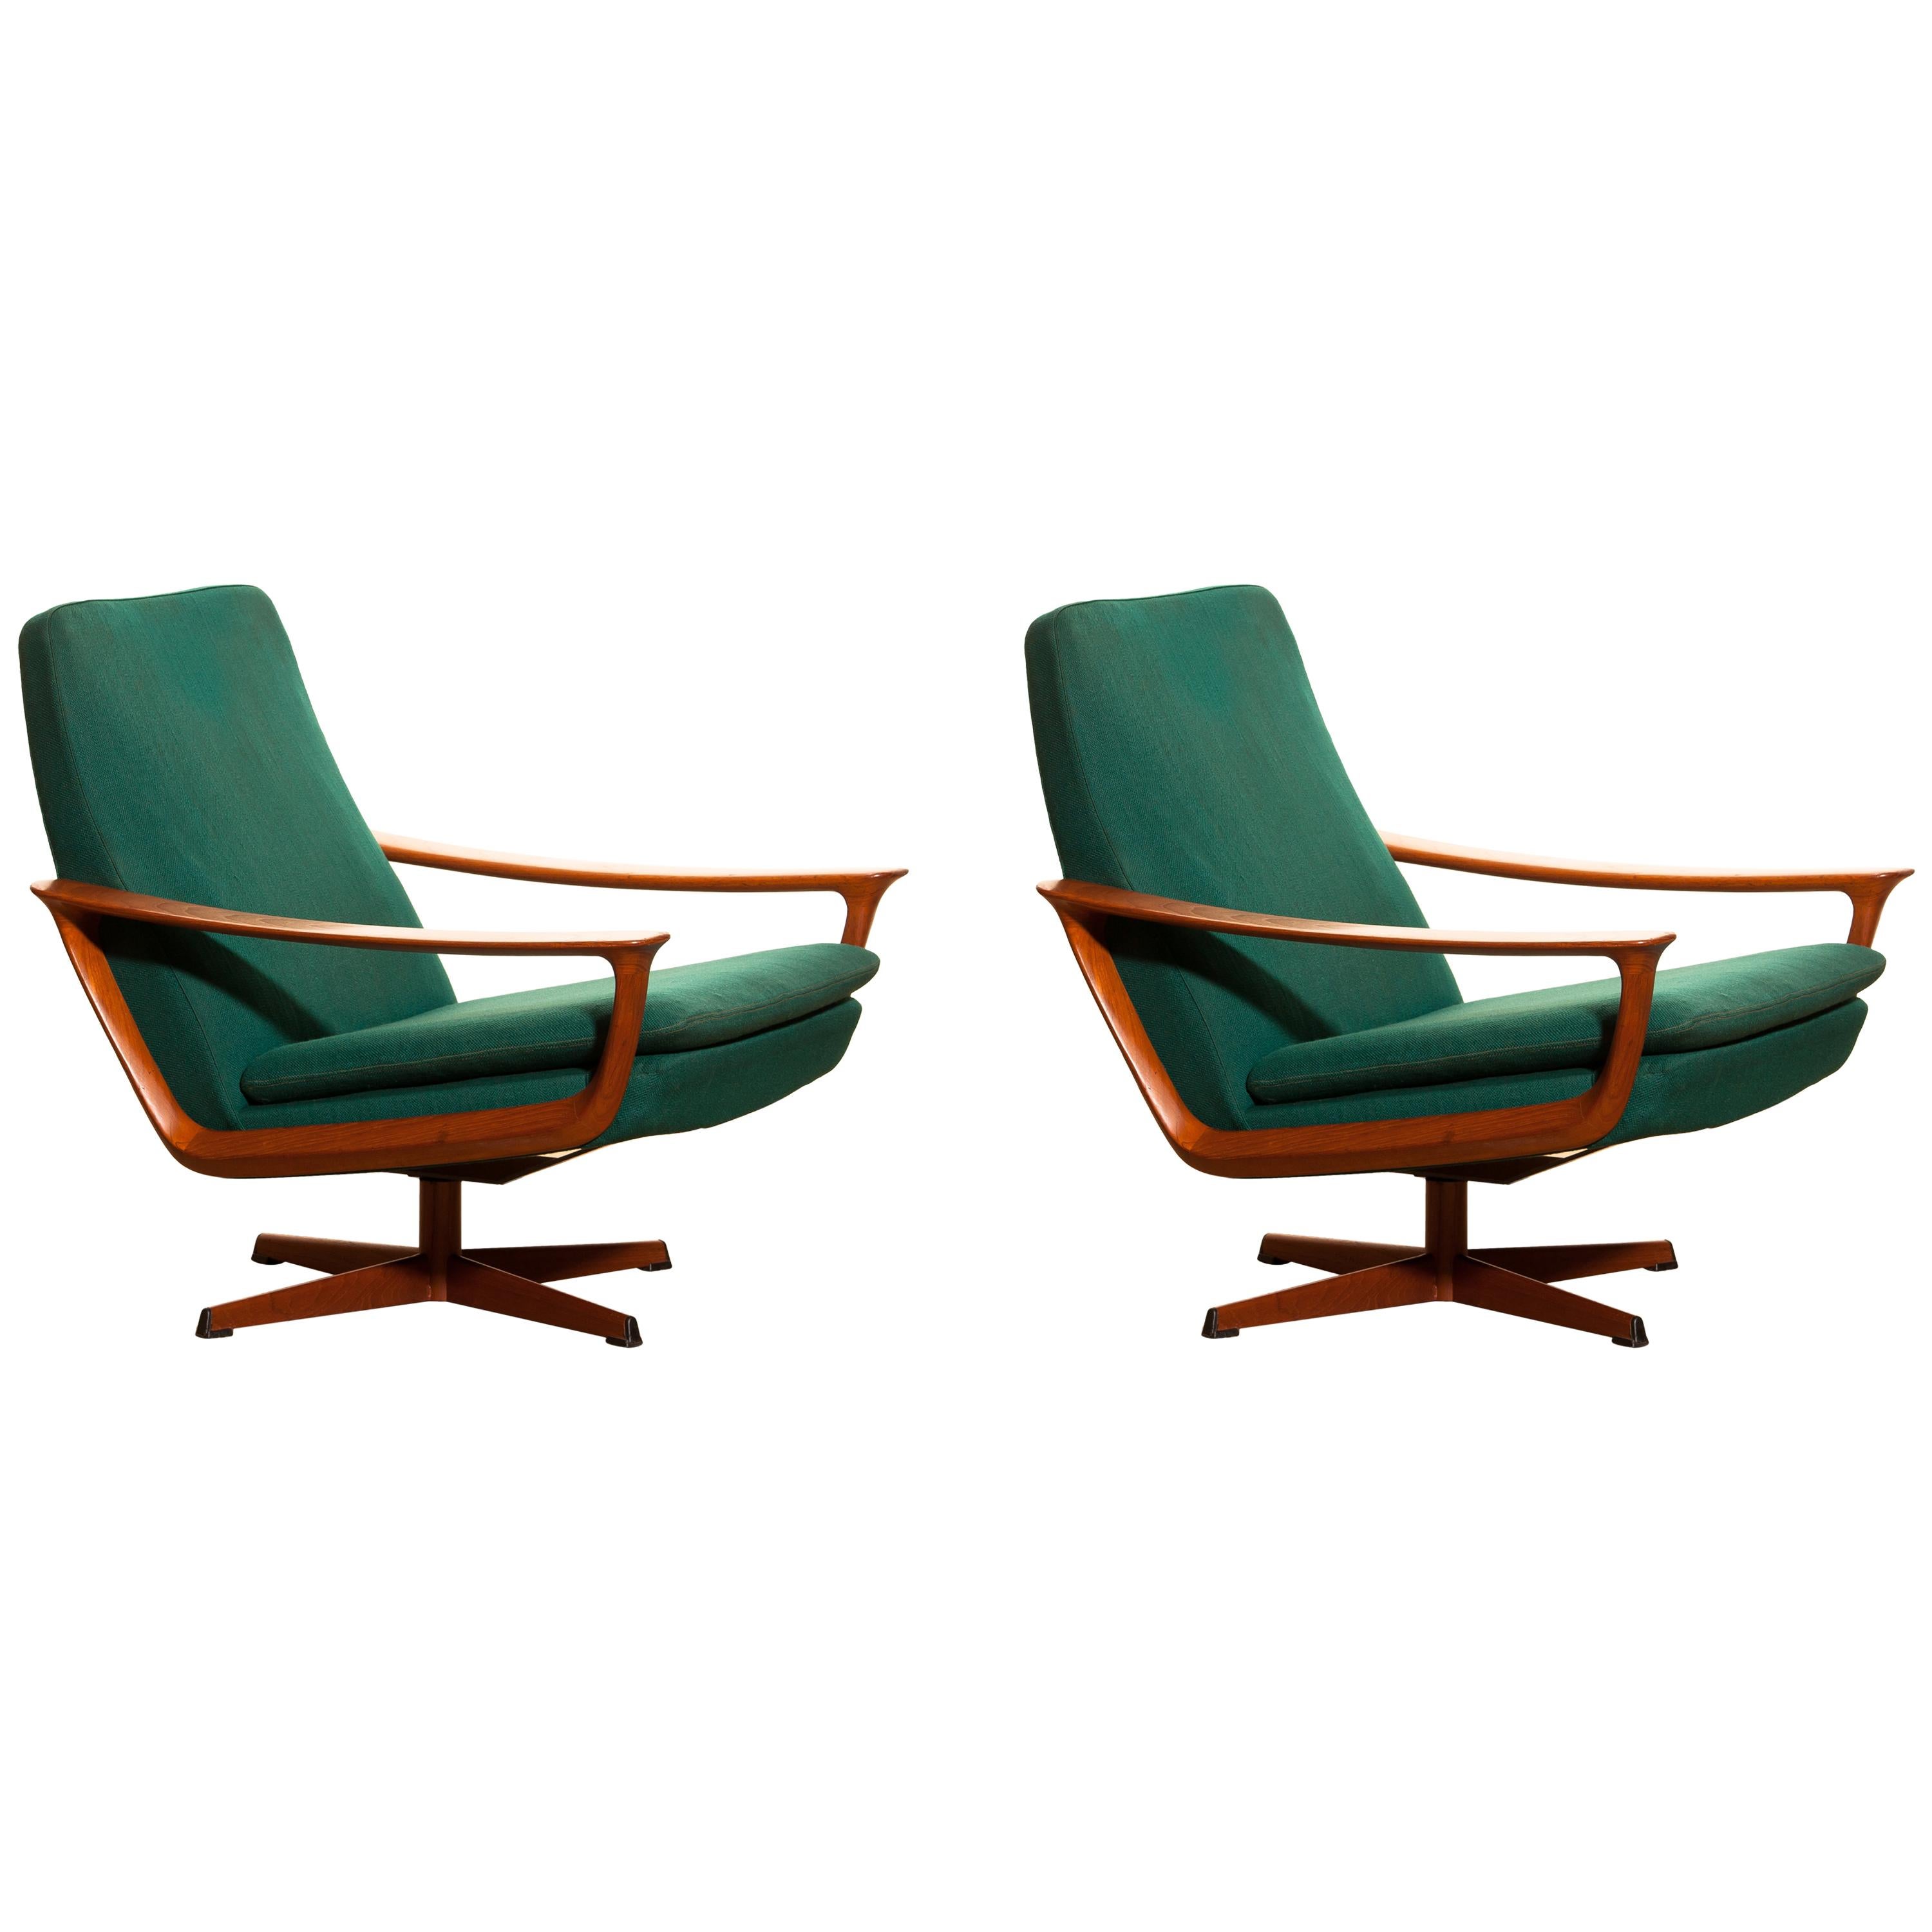 Teak Set of Two Swivel Chairs by Johannes Andersson for Trensums Denmark, 1960